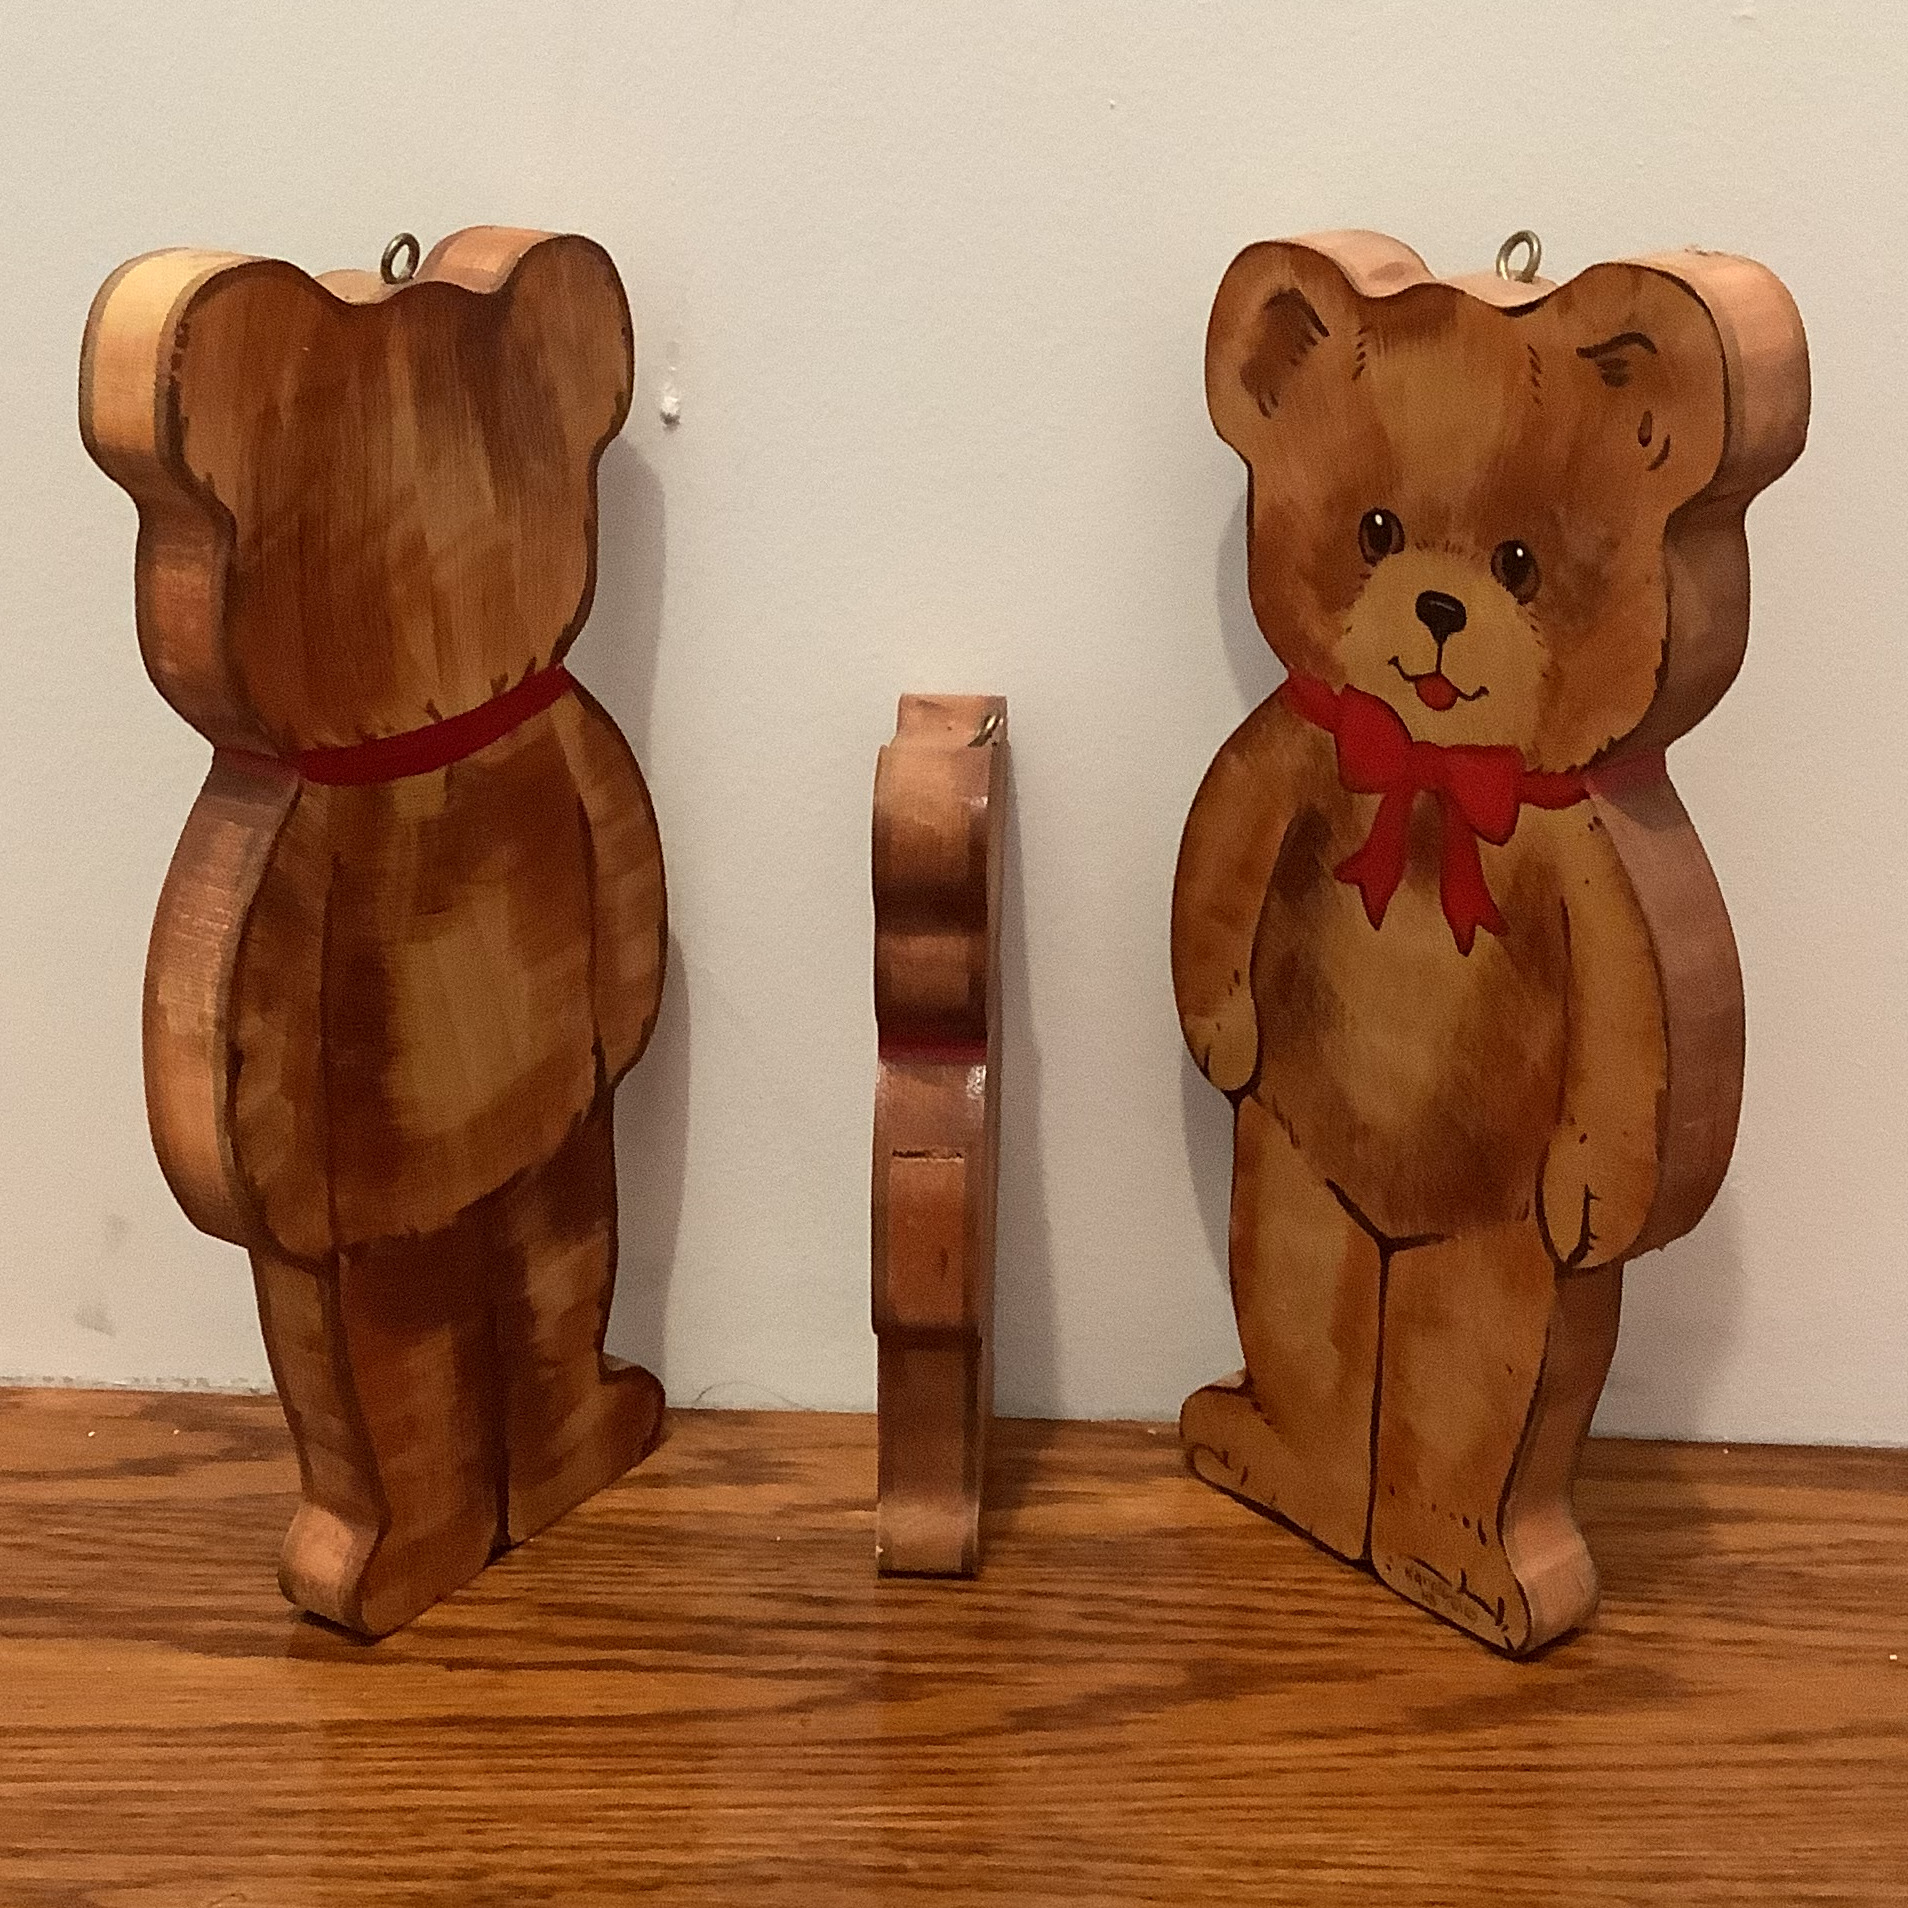 Side view of wooden bears showing their two-dimensional shape